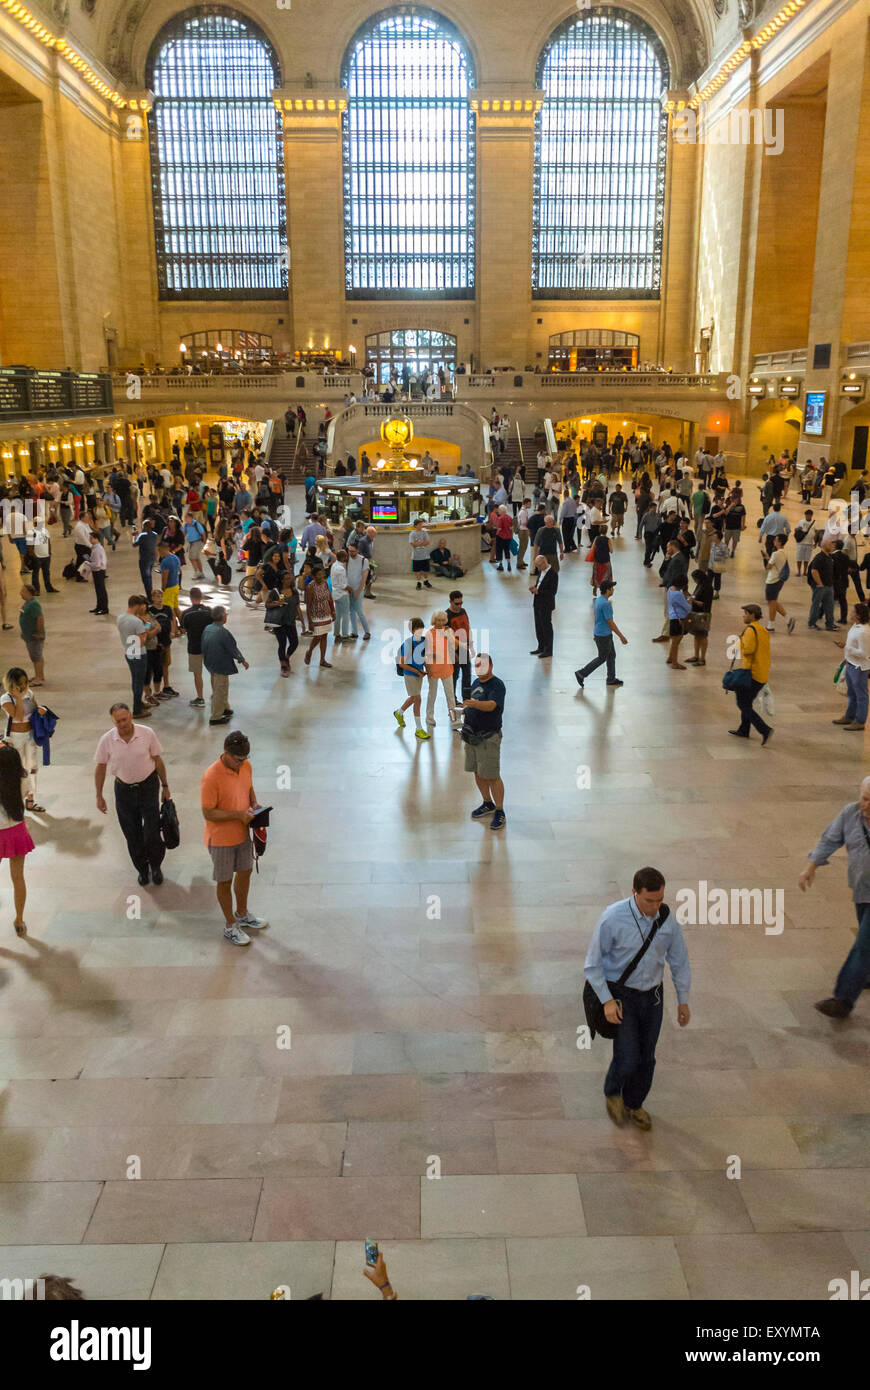 New York City, NY, USA, Aerial View, High Angle, Crowd Tourists inside Grand Central Station Terminal, Main Concourse Stock Photo